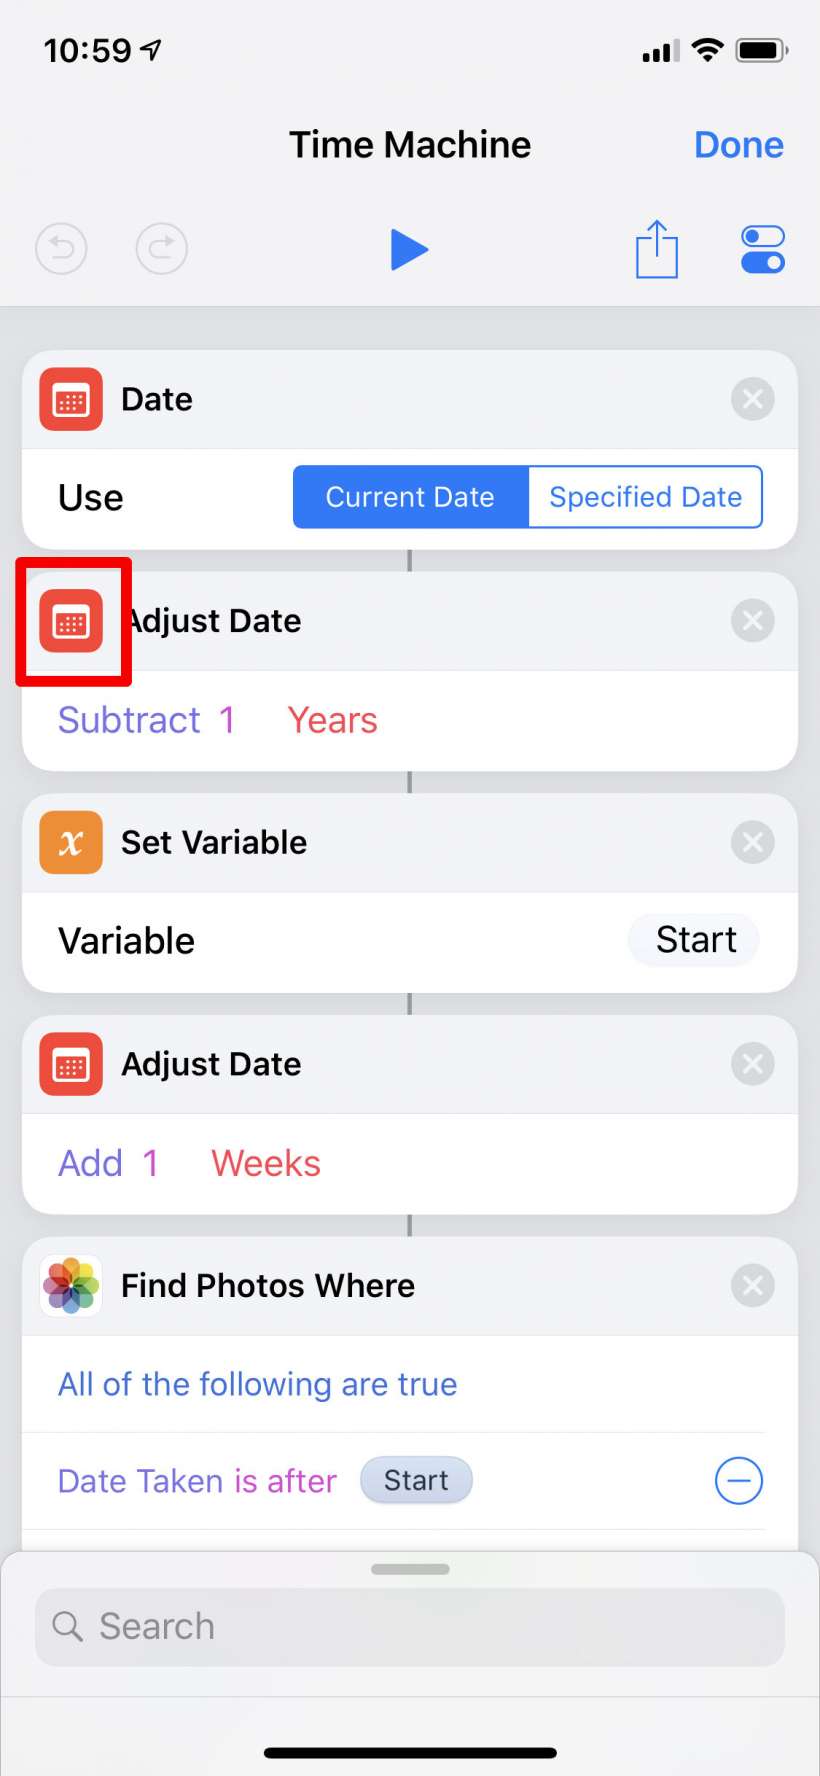 How to make simple edits to Shortcuts on iPhone